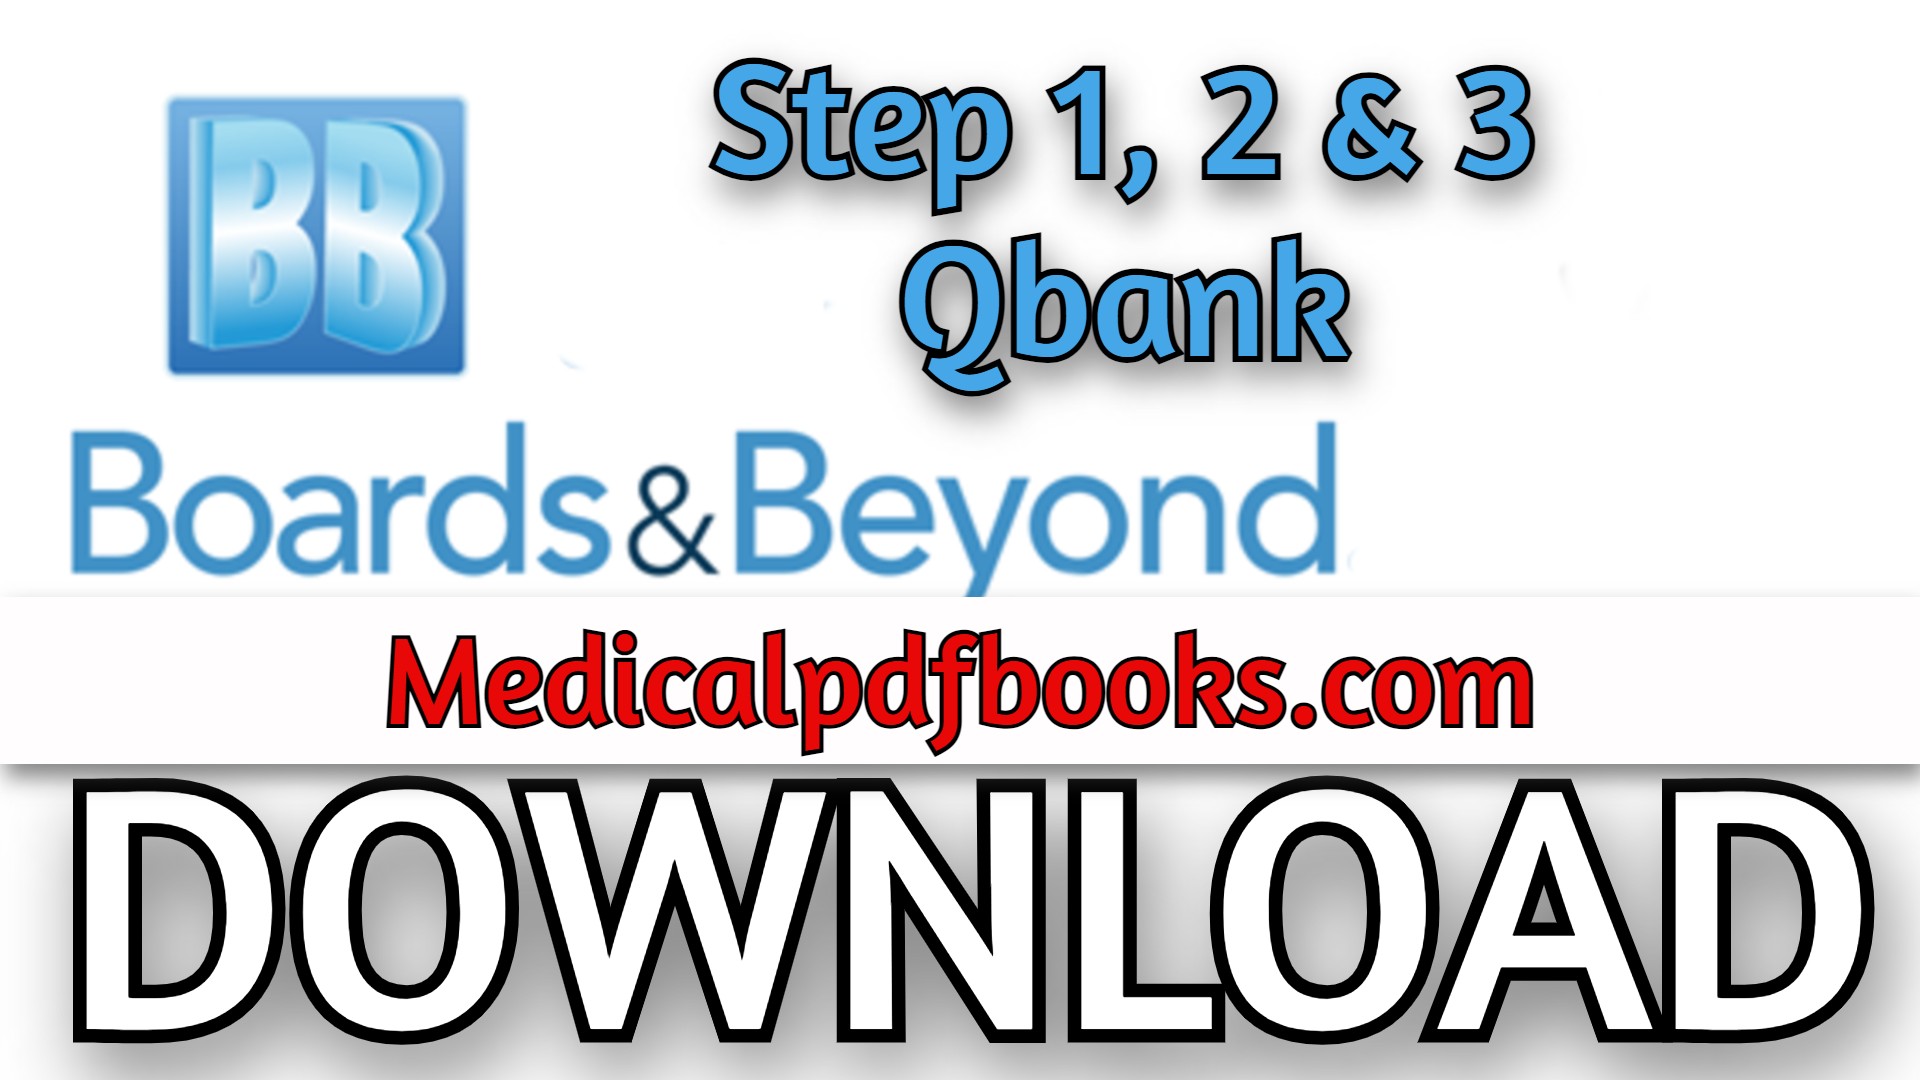 Boards and Beyond Step 1, 2 & 3 Qbank 2021 Free Download